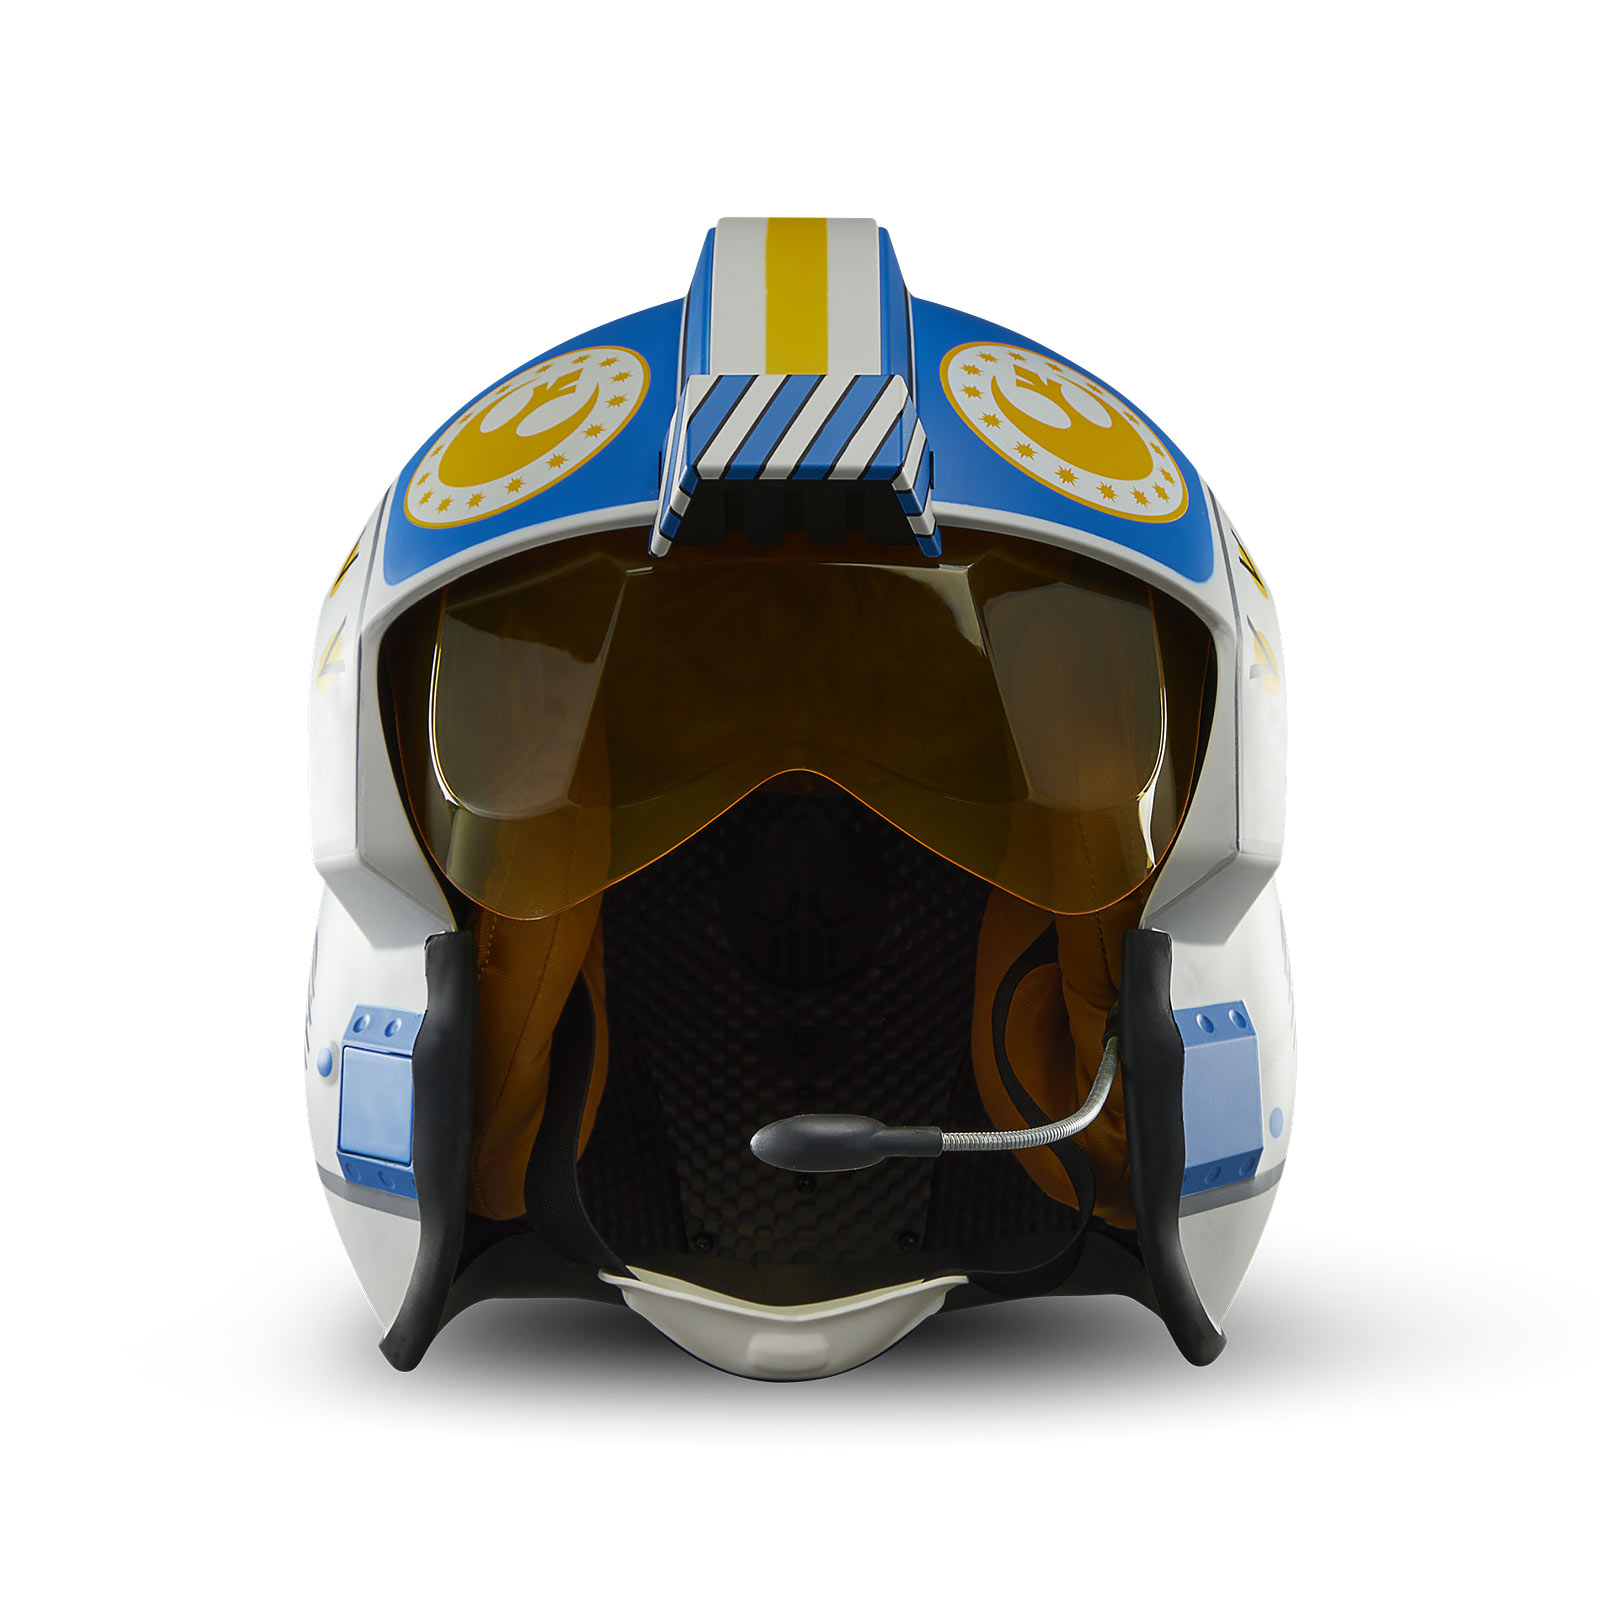 Star Wars - Carson Teva Black Series Helmet Replica with Light and Sound Effects